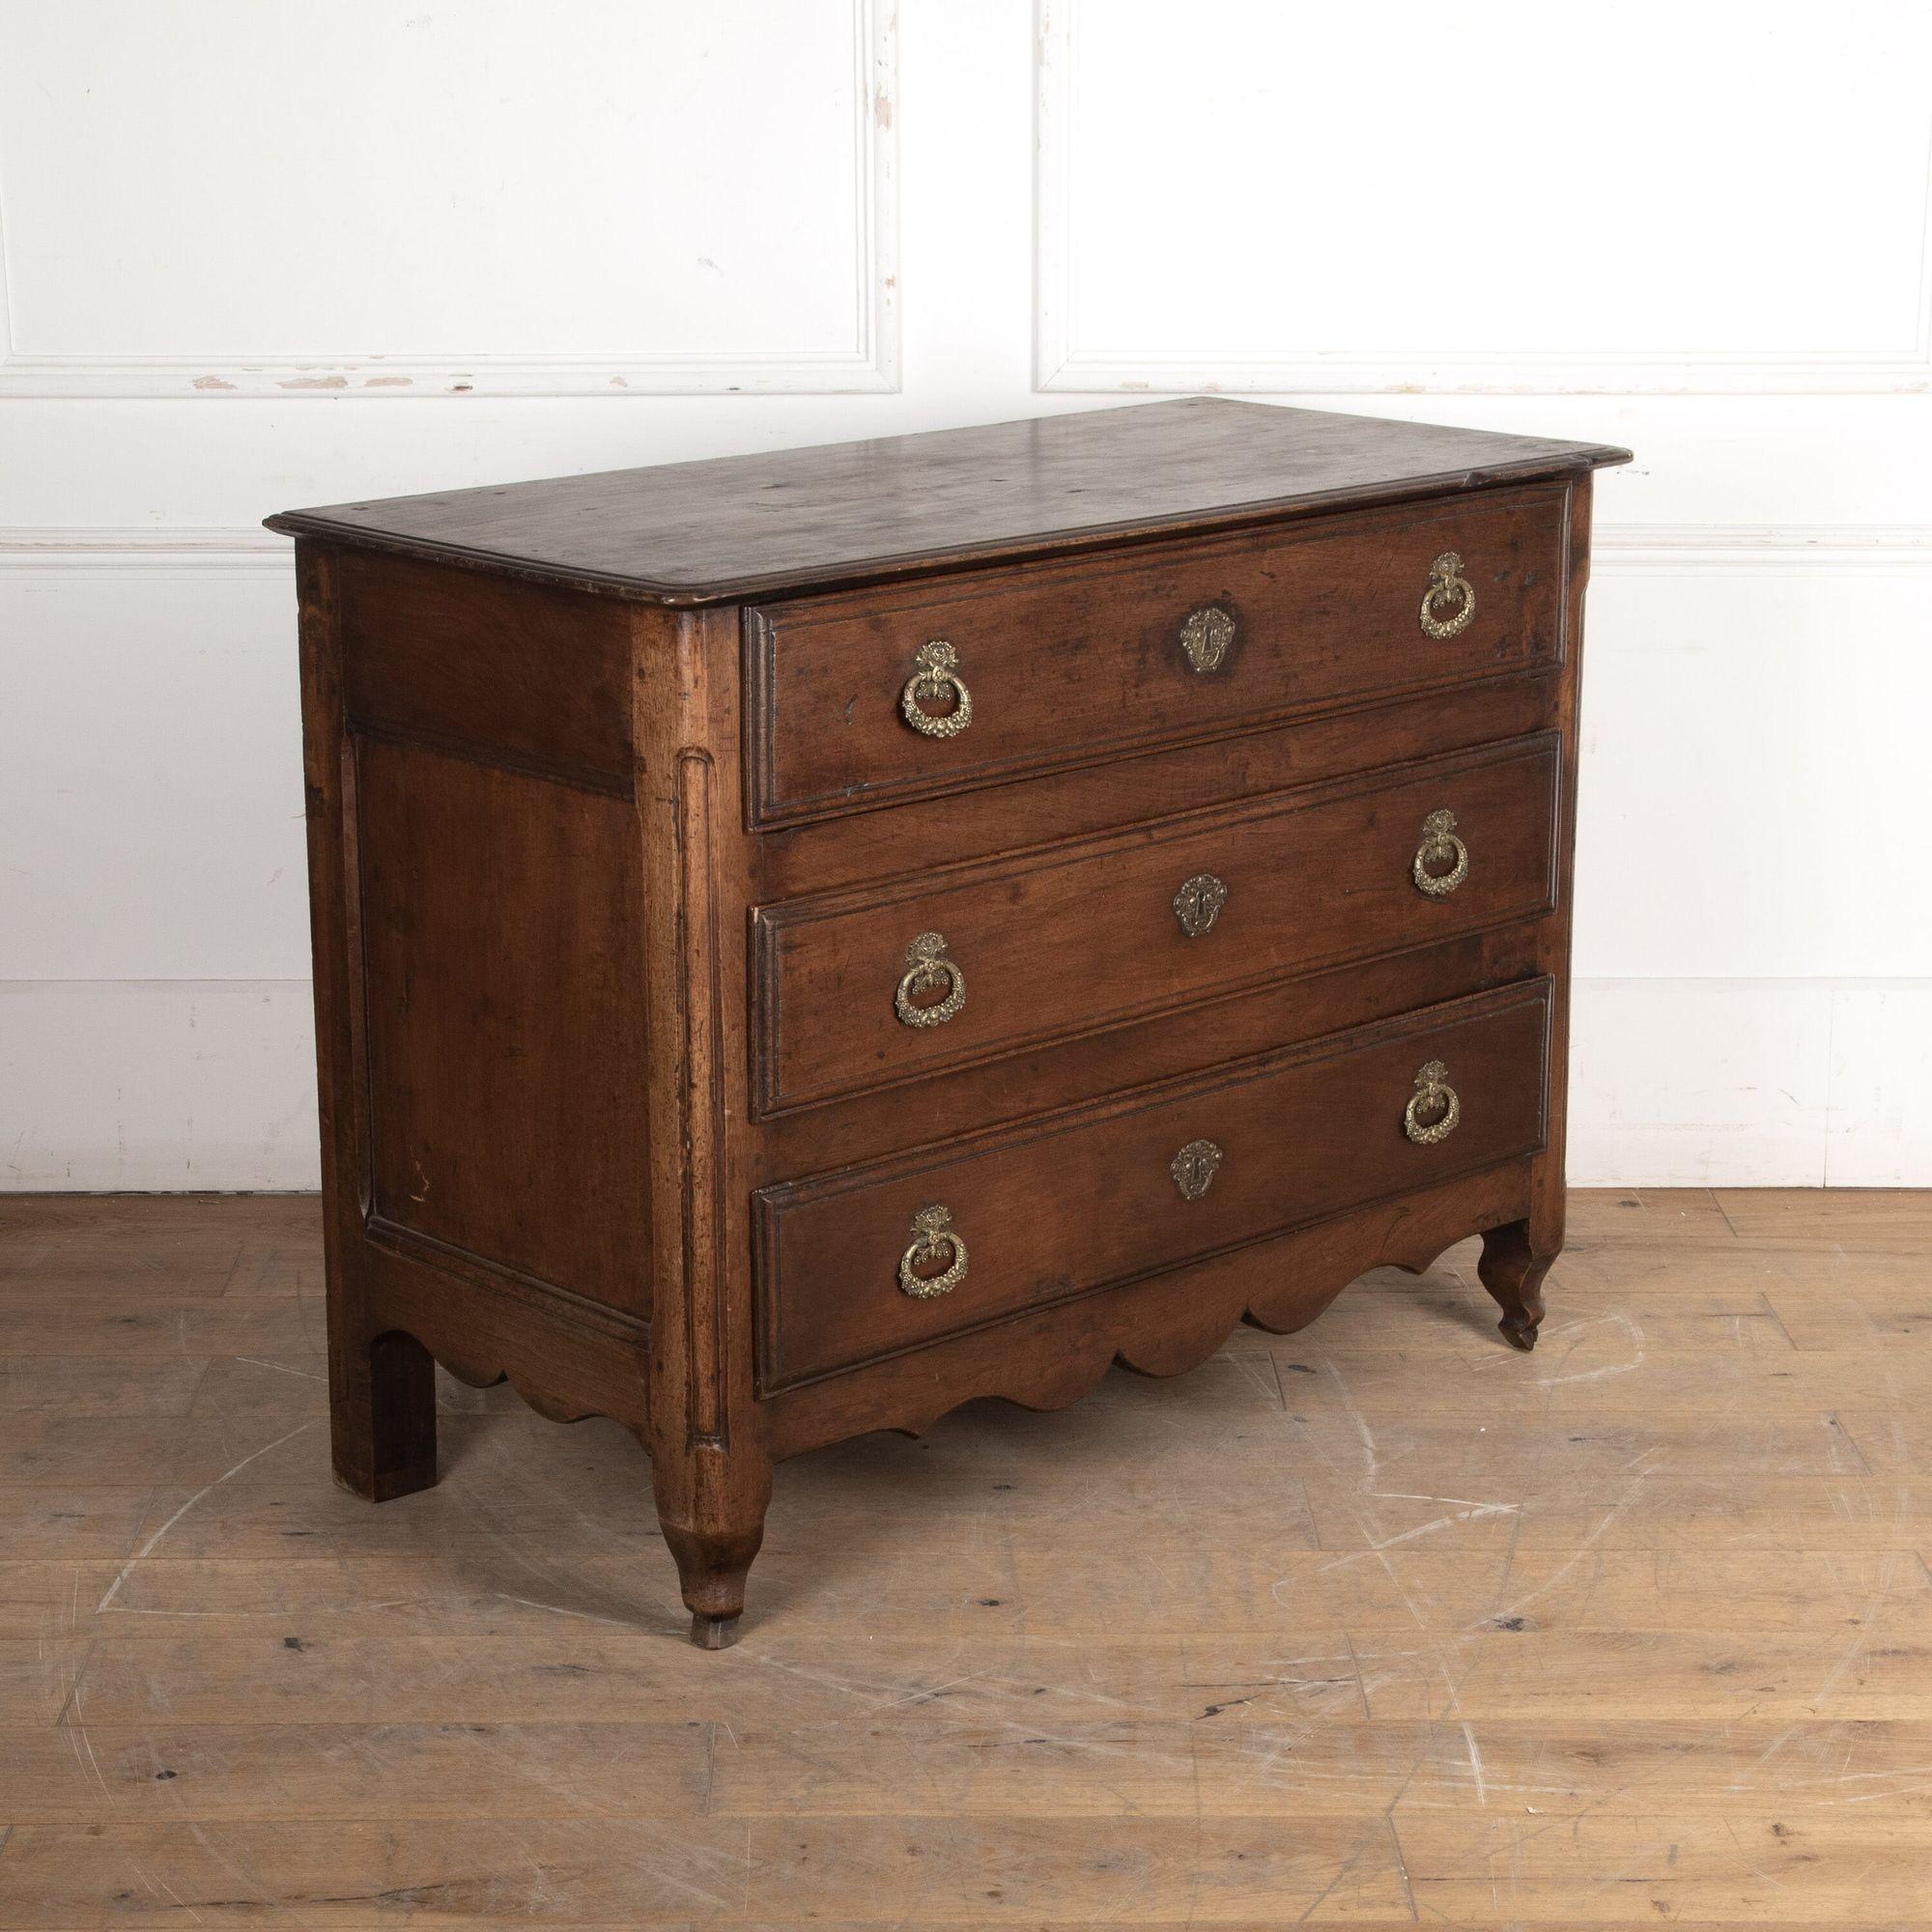 18th century Robust three drawer commode with a deep, warm patina.
Cornucopian themes on the brass drop handles and faux escutcheons. The top has 